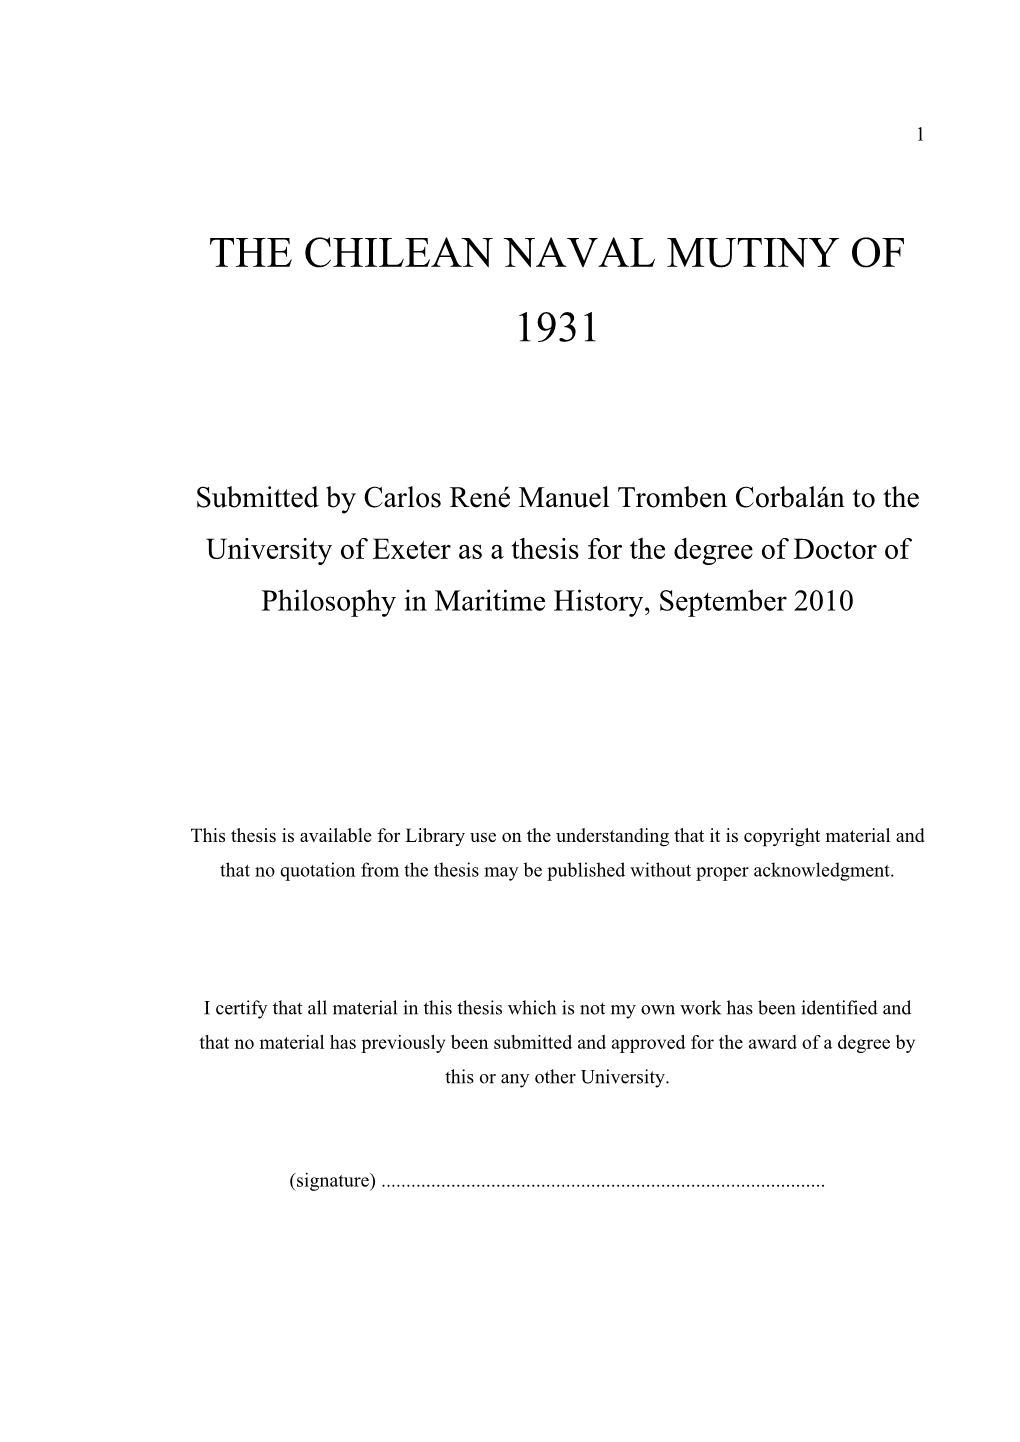 The Chilean Naval Mutiny of 1931